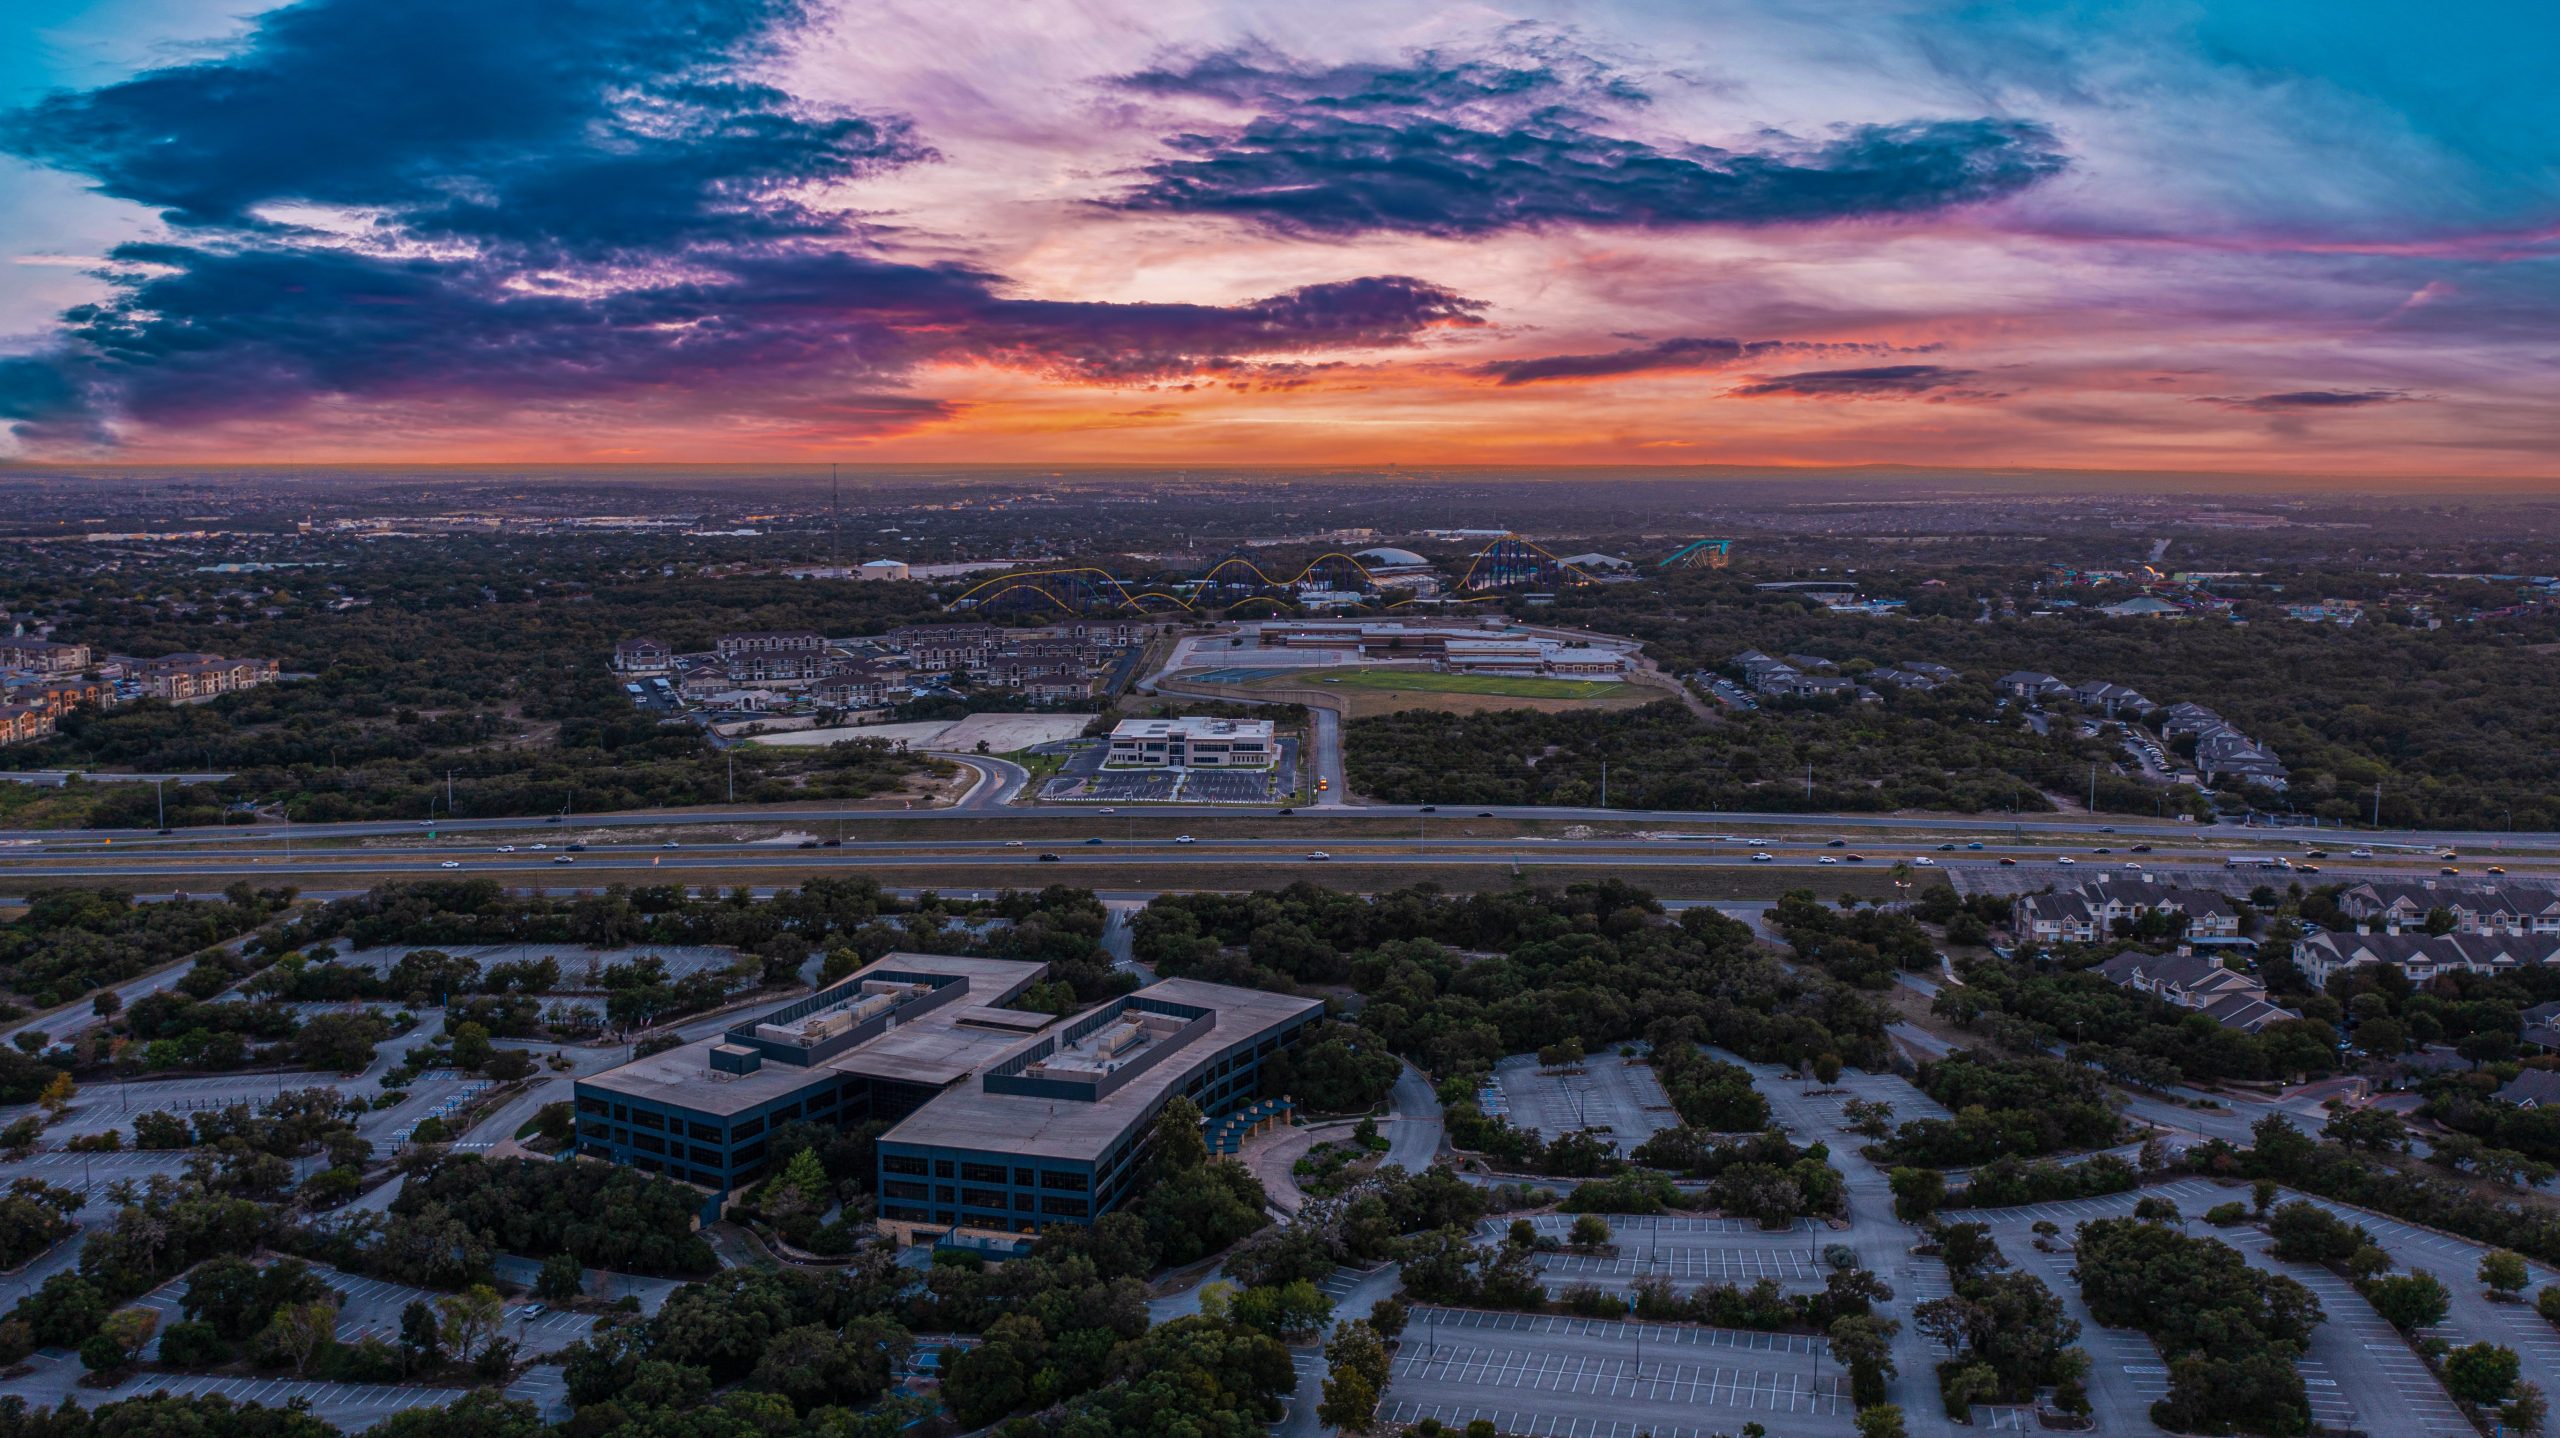 Sunset Over San Antonio - beautiful panoramic sunset over a commercial property adjacent to a major highway